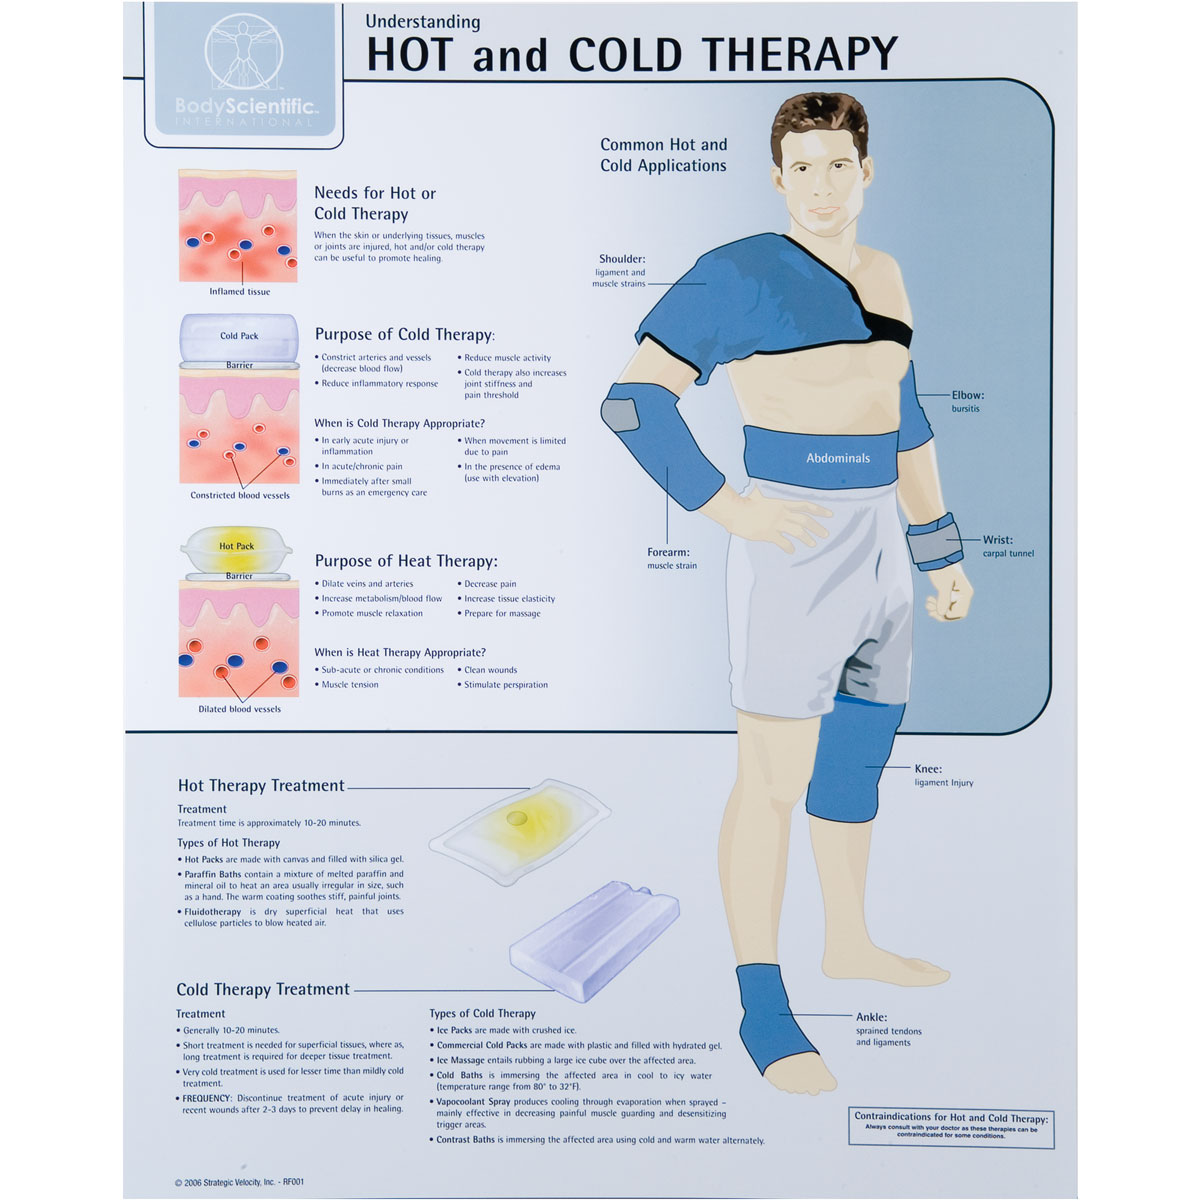 https://www.3bscientific.com/thumblibrary/W59505/W59505_01_1200_1200_Hot-and-Cold-Therapy-Chart-Laminated.jpg